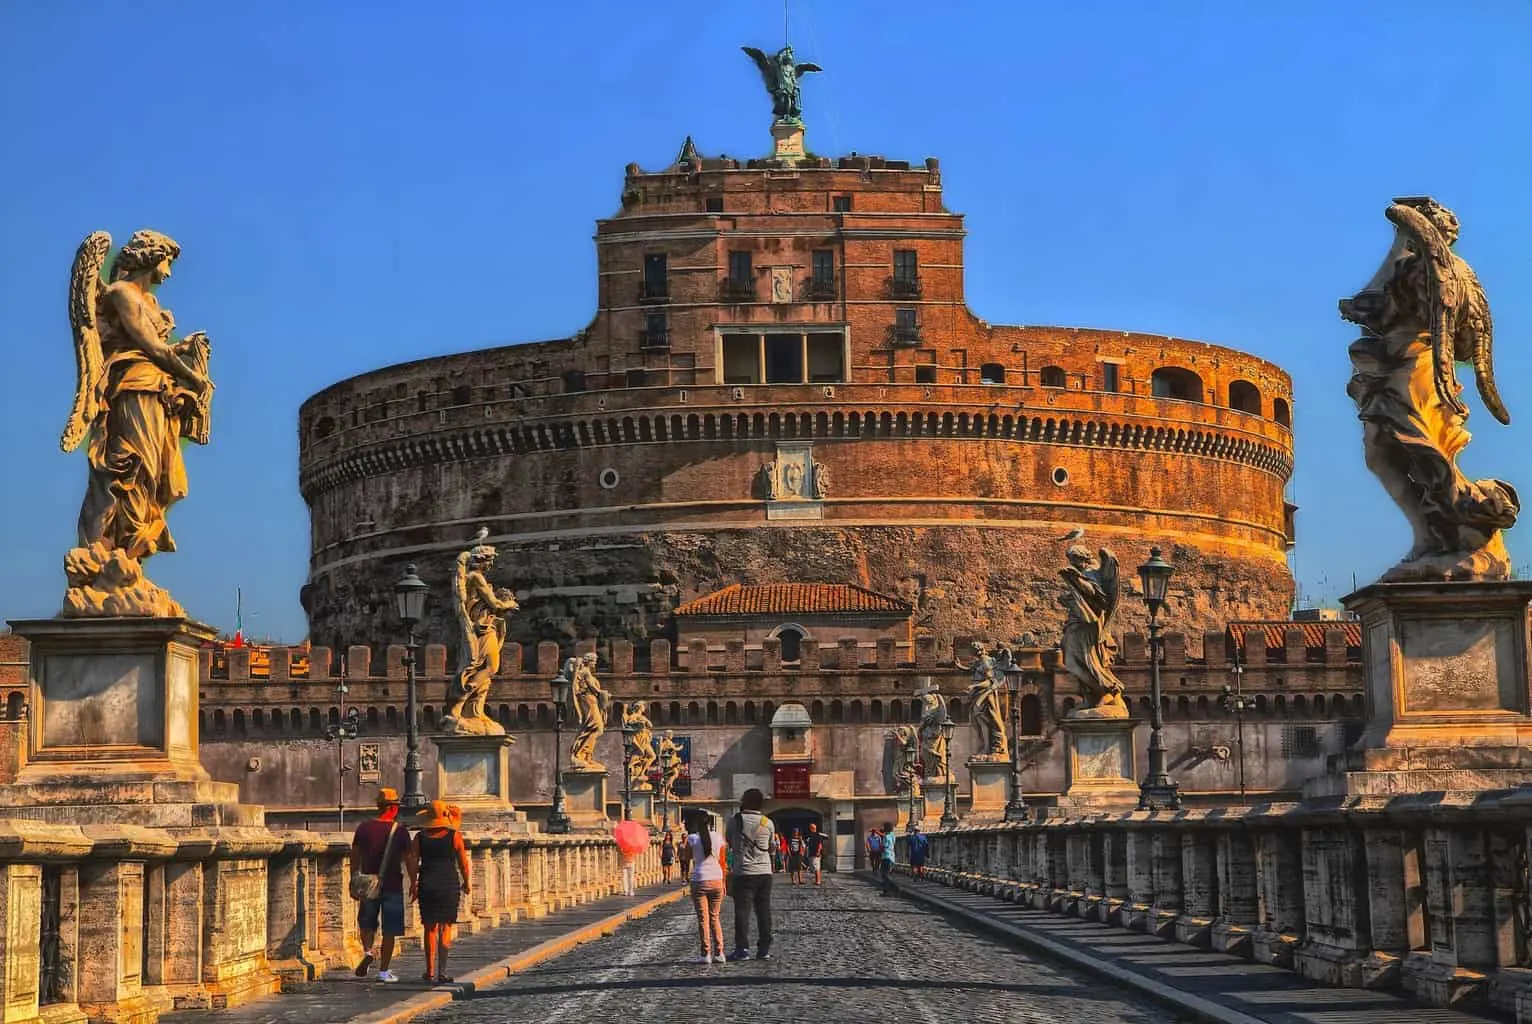 A view of Castel Sant' Angelo from across the Tiber River. 